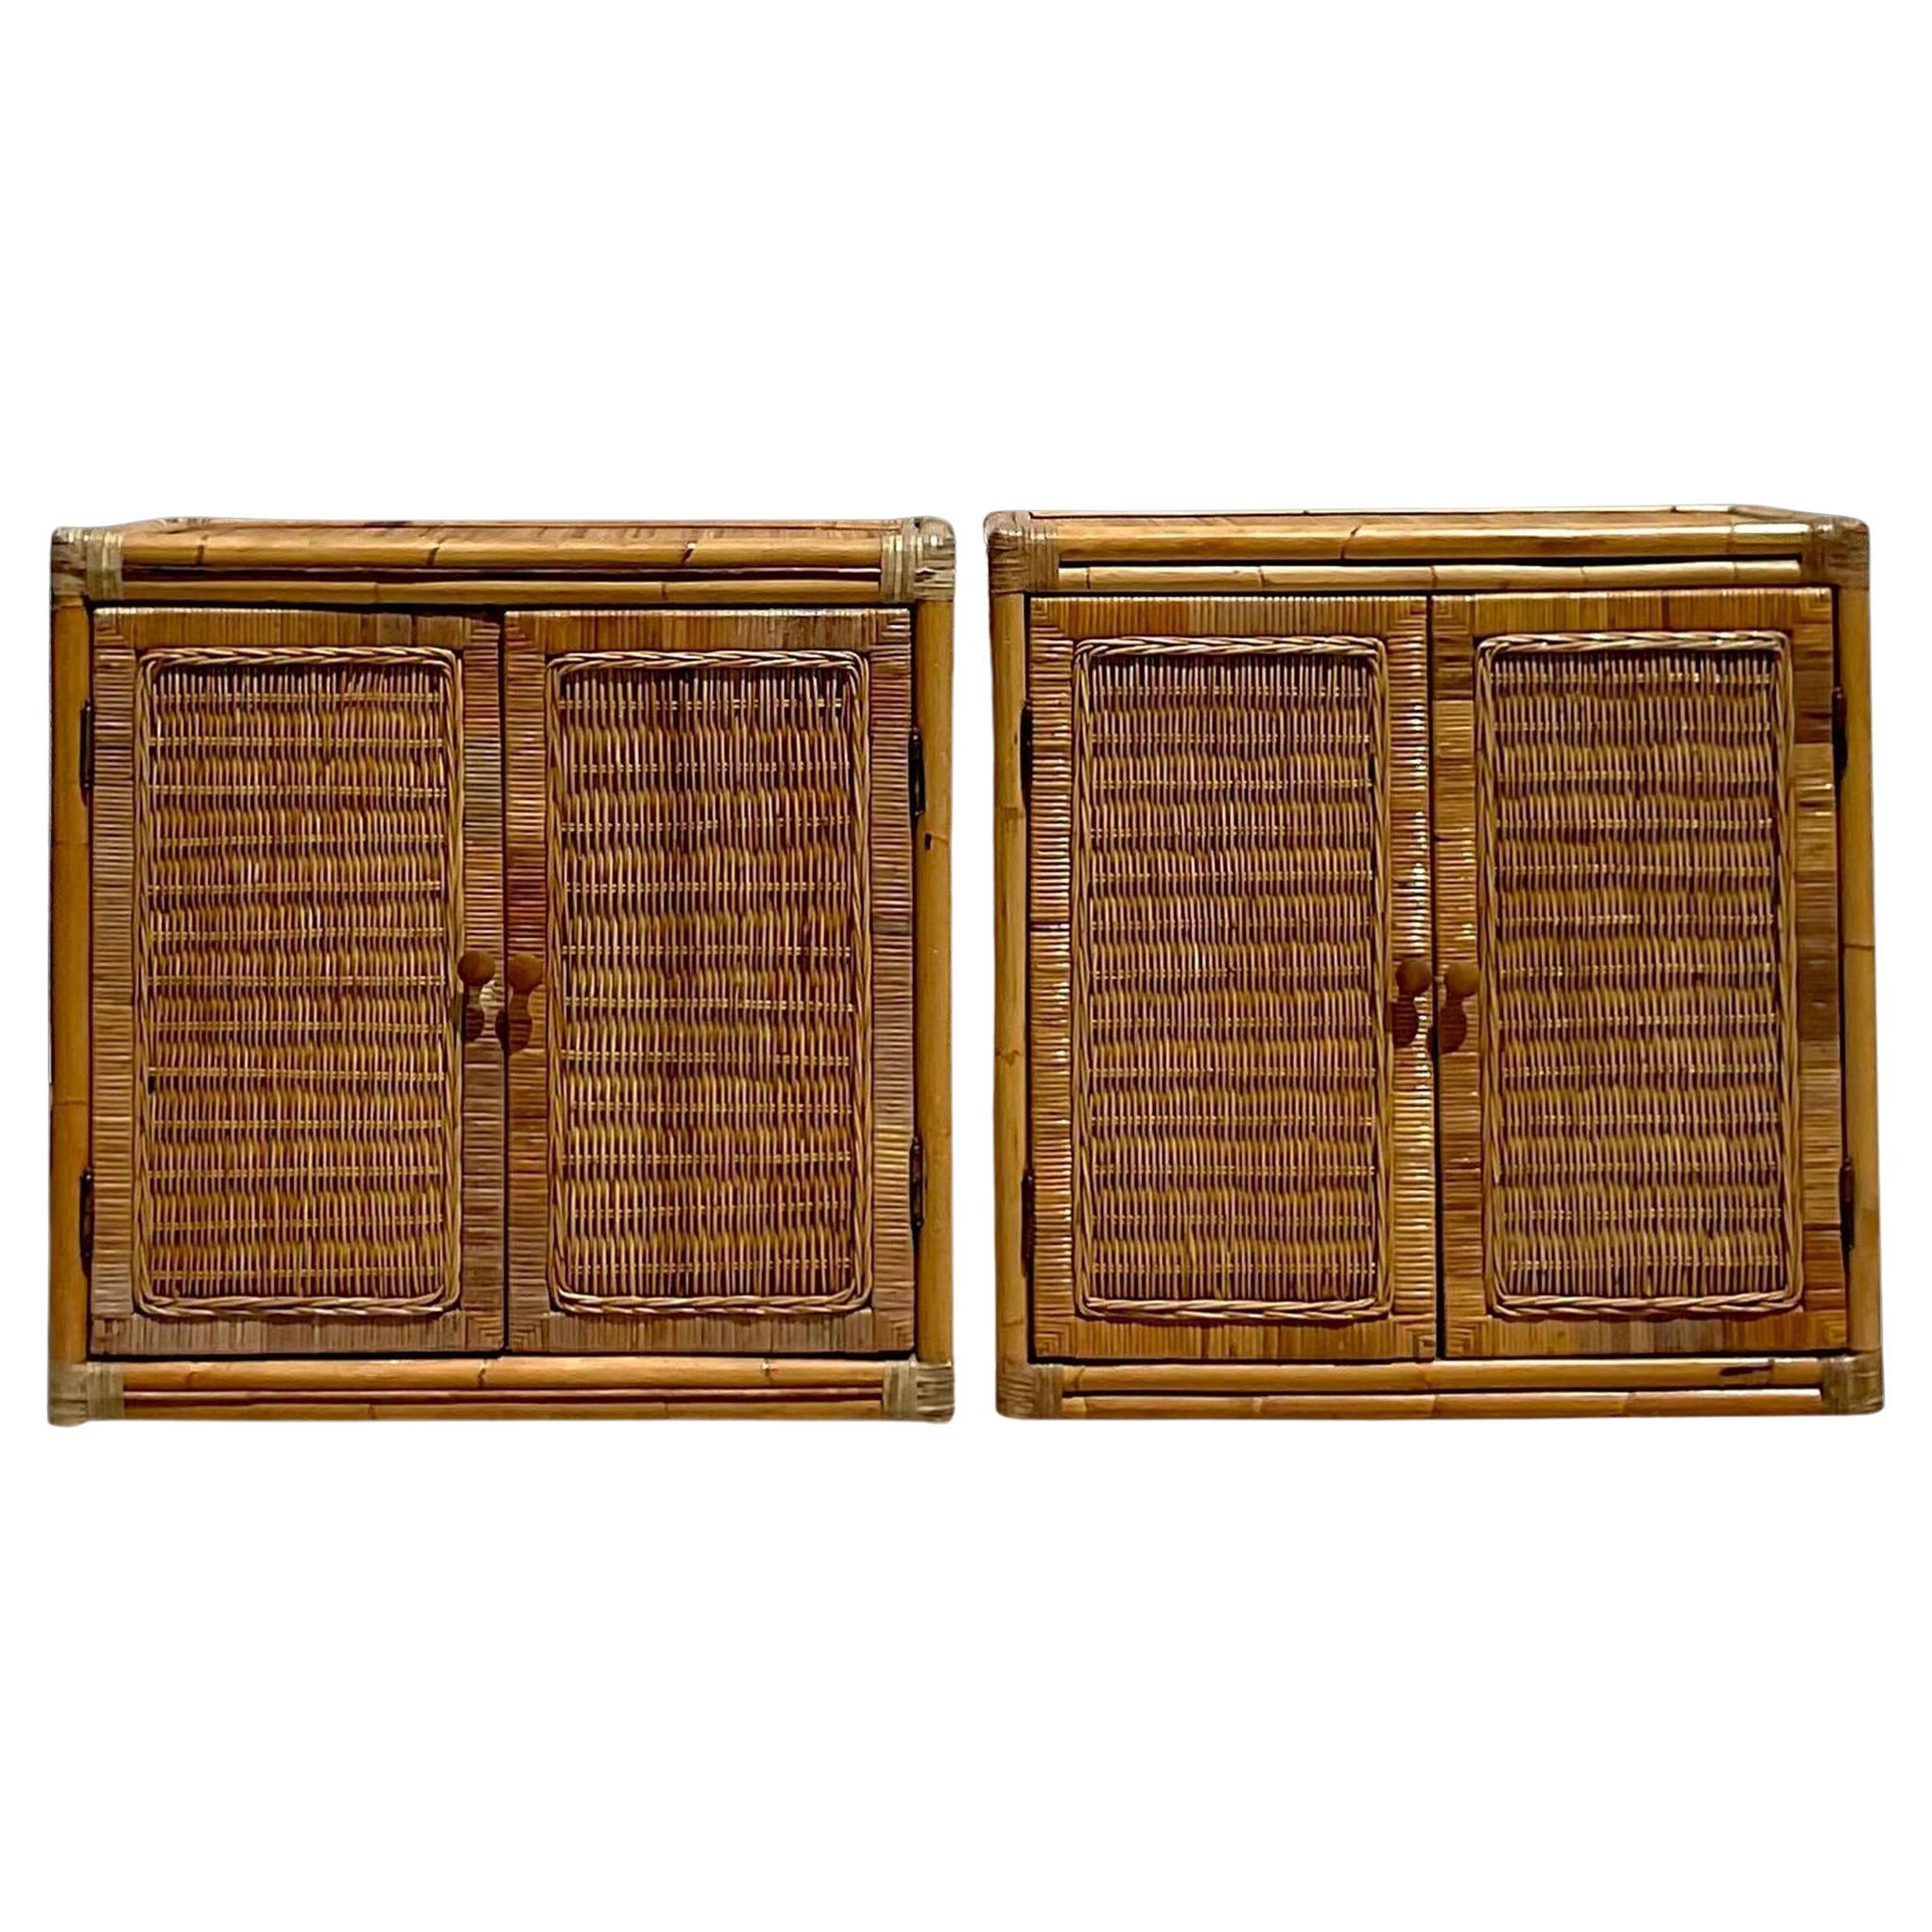 Late 20th Century Vintage Coastal Woven Rattan Cabinets - a Pair For Sale